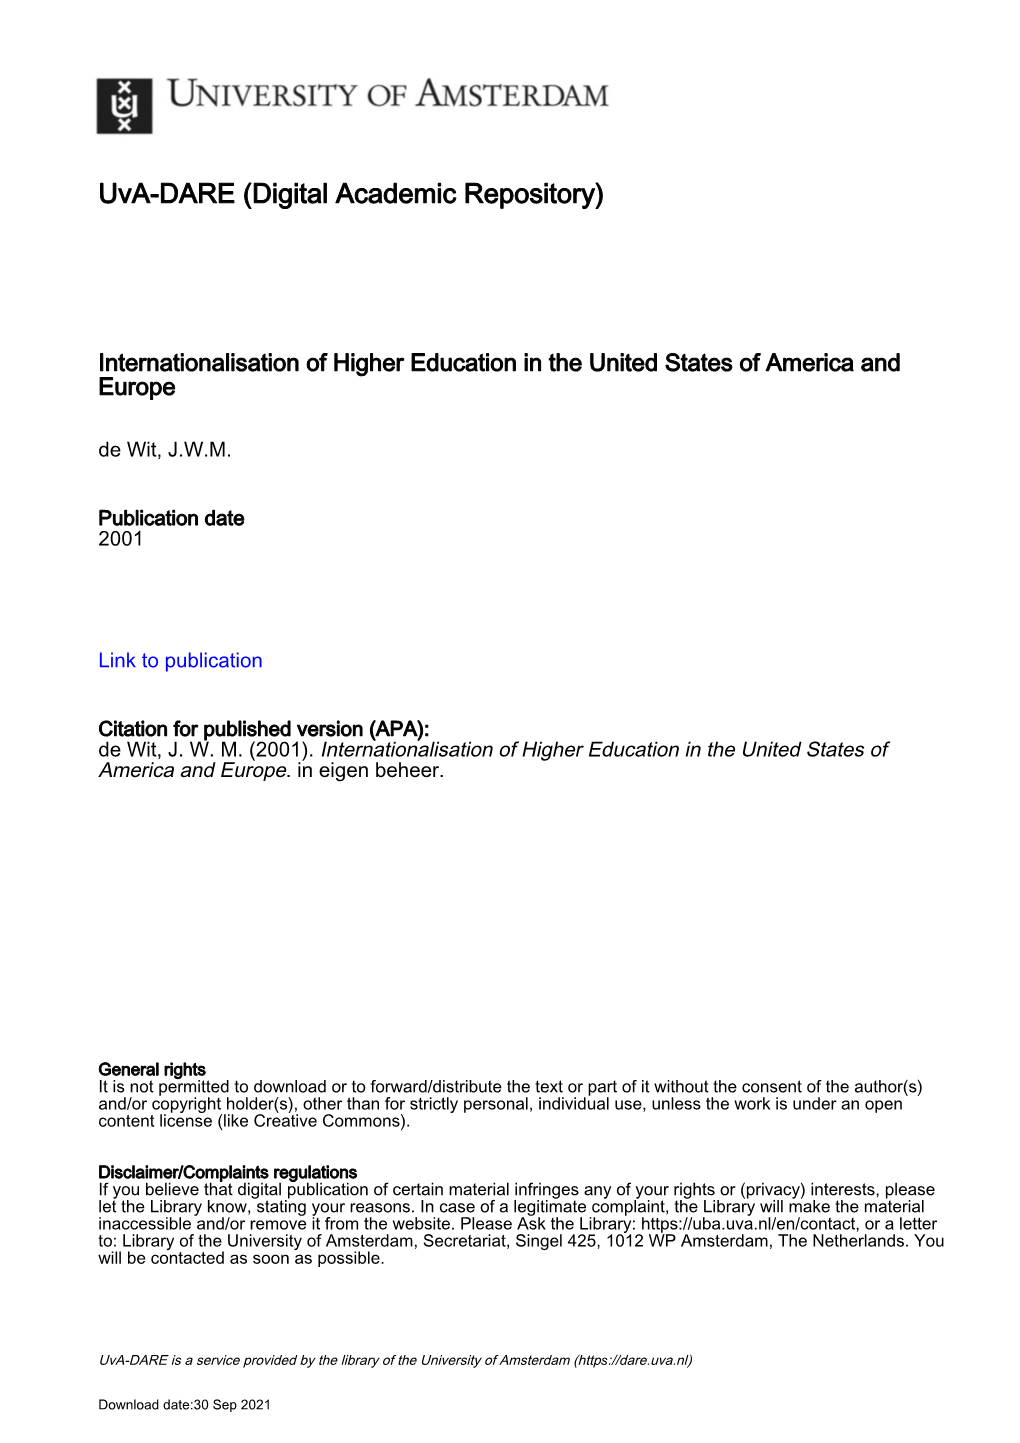 Thee Rise of Regional and International Academic Networks